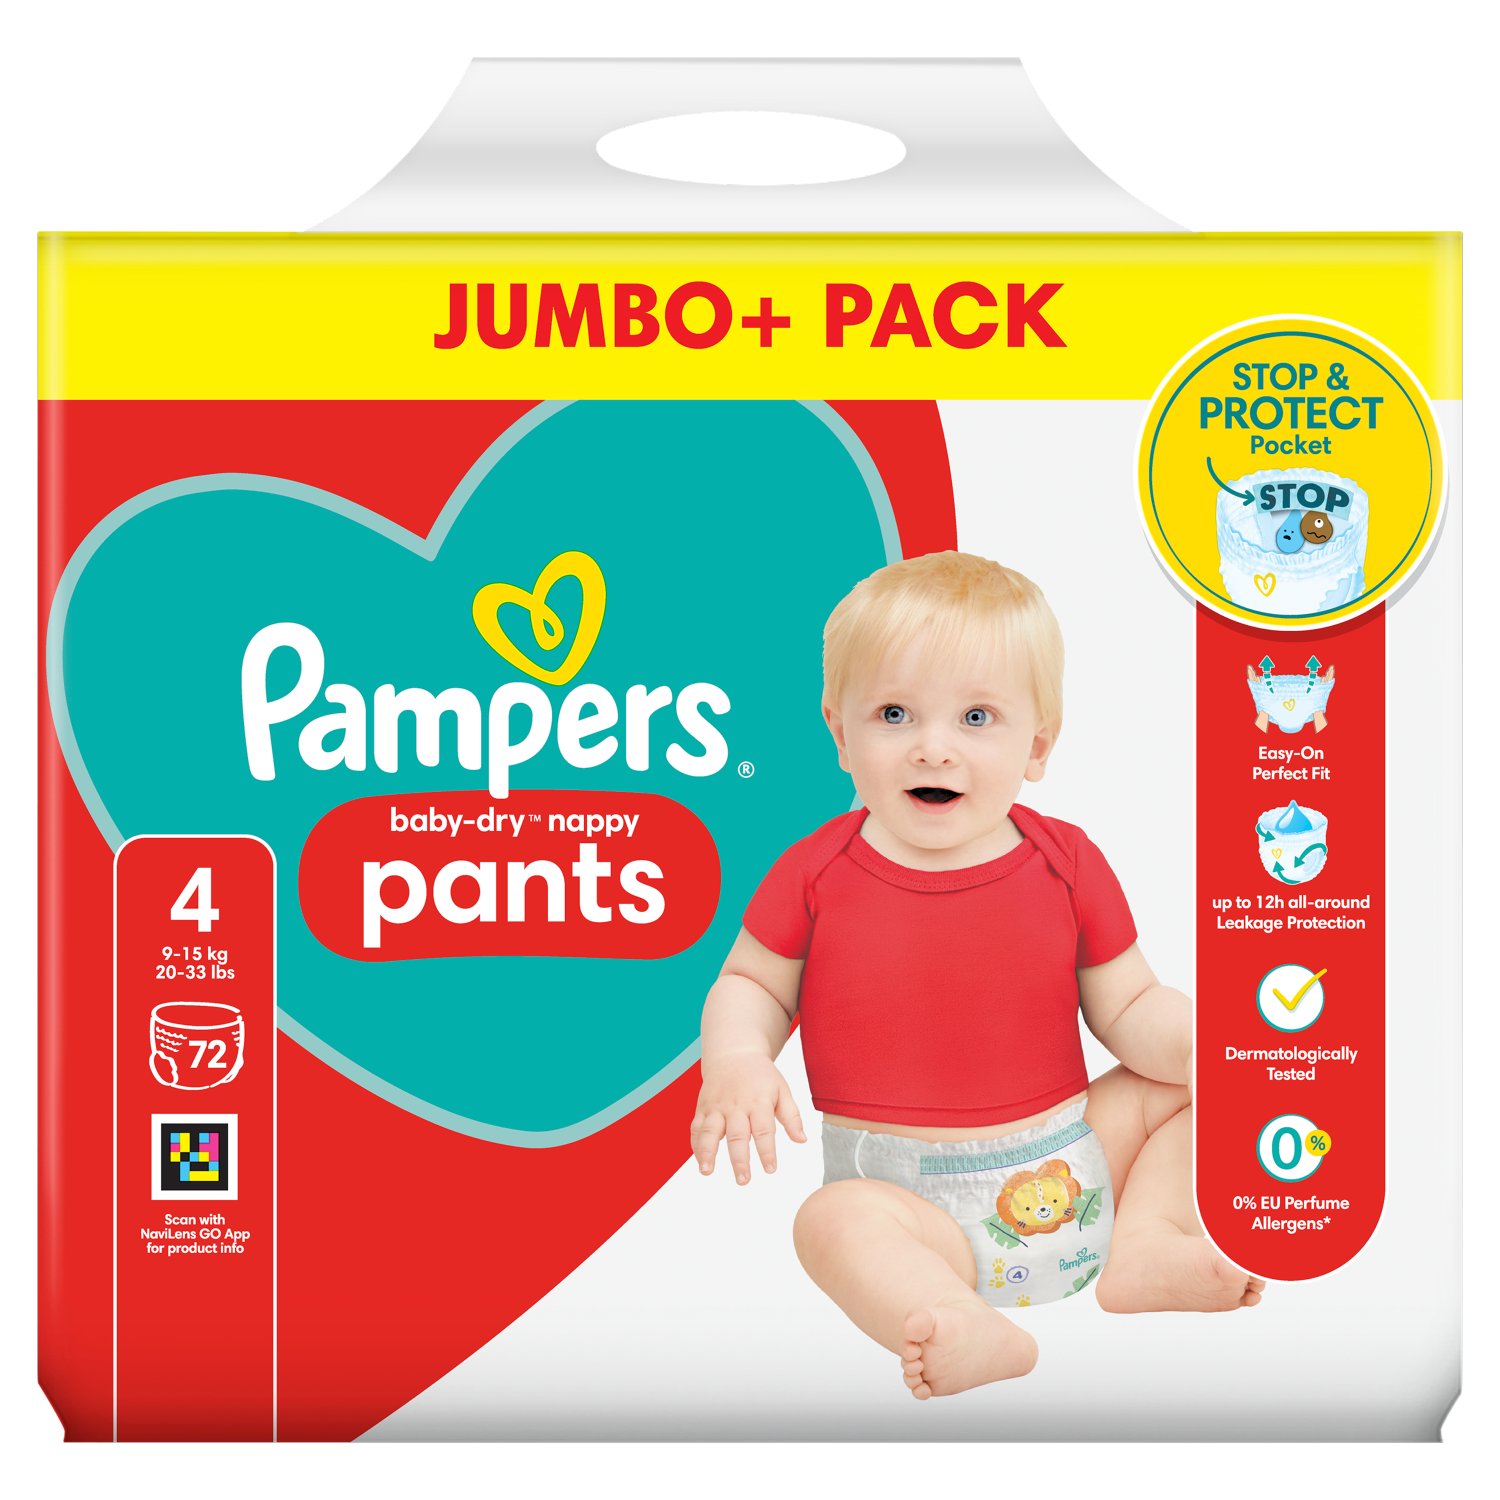 Pampers Baby Dry Nappy Pants Size 4 Jumbo+ Pack (72 Piece)